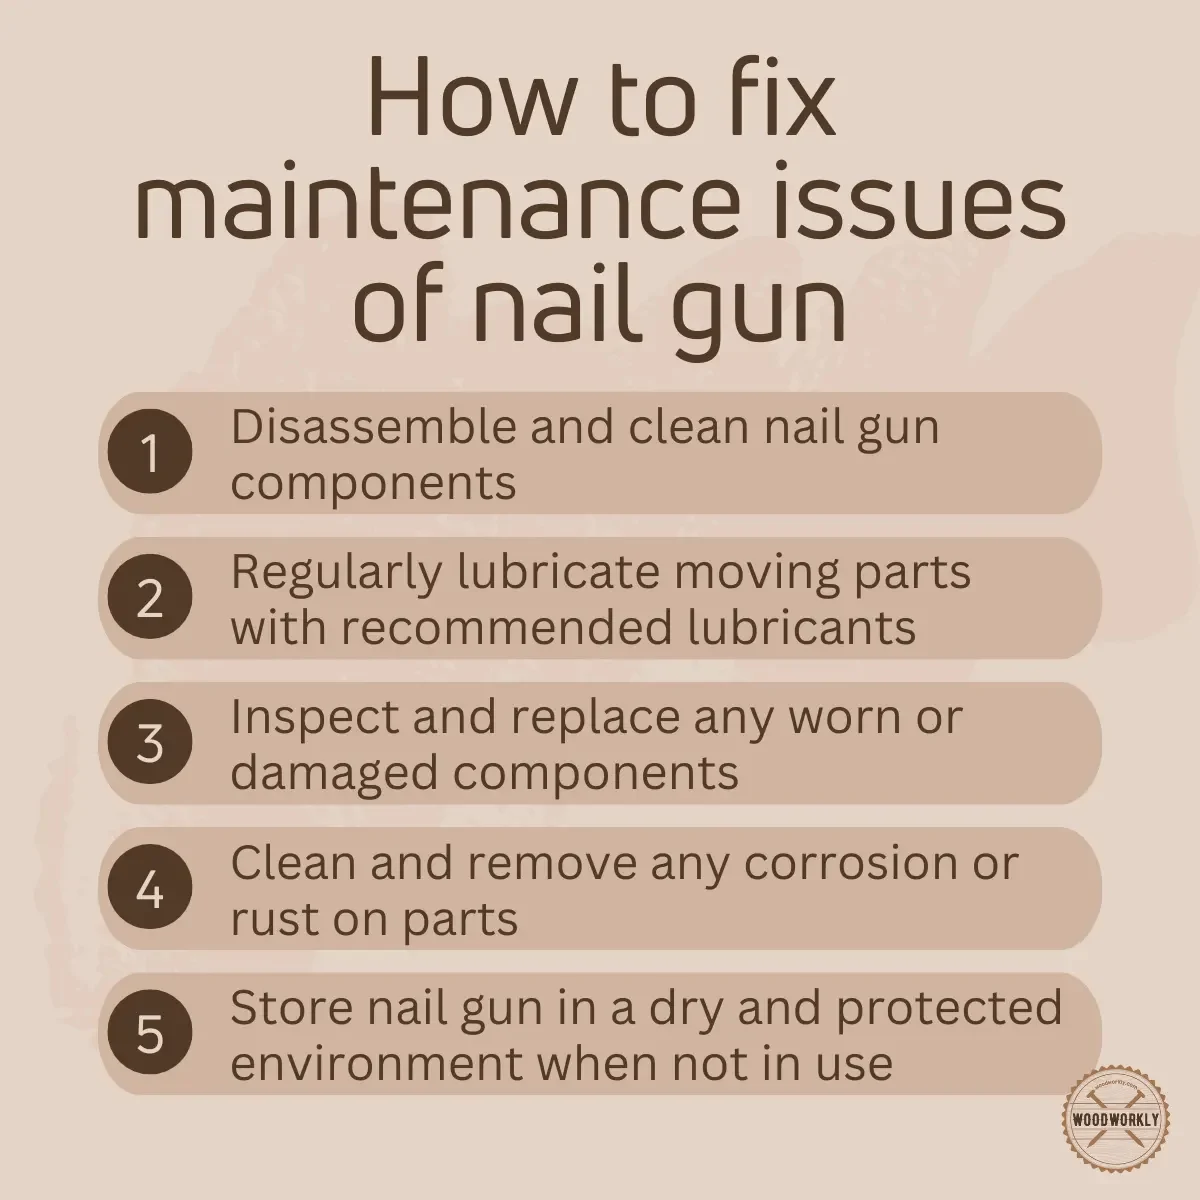 How to fix maintenance issues of nail gun